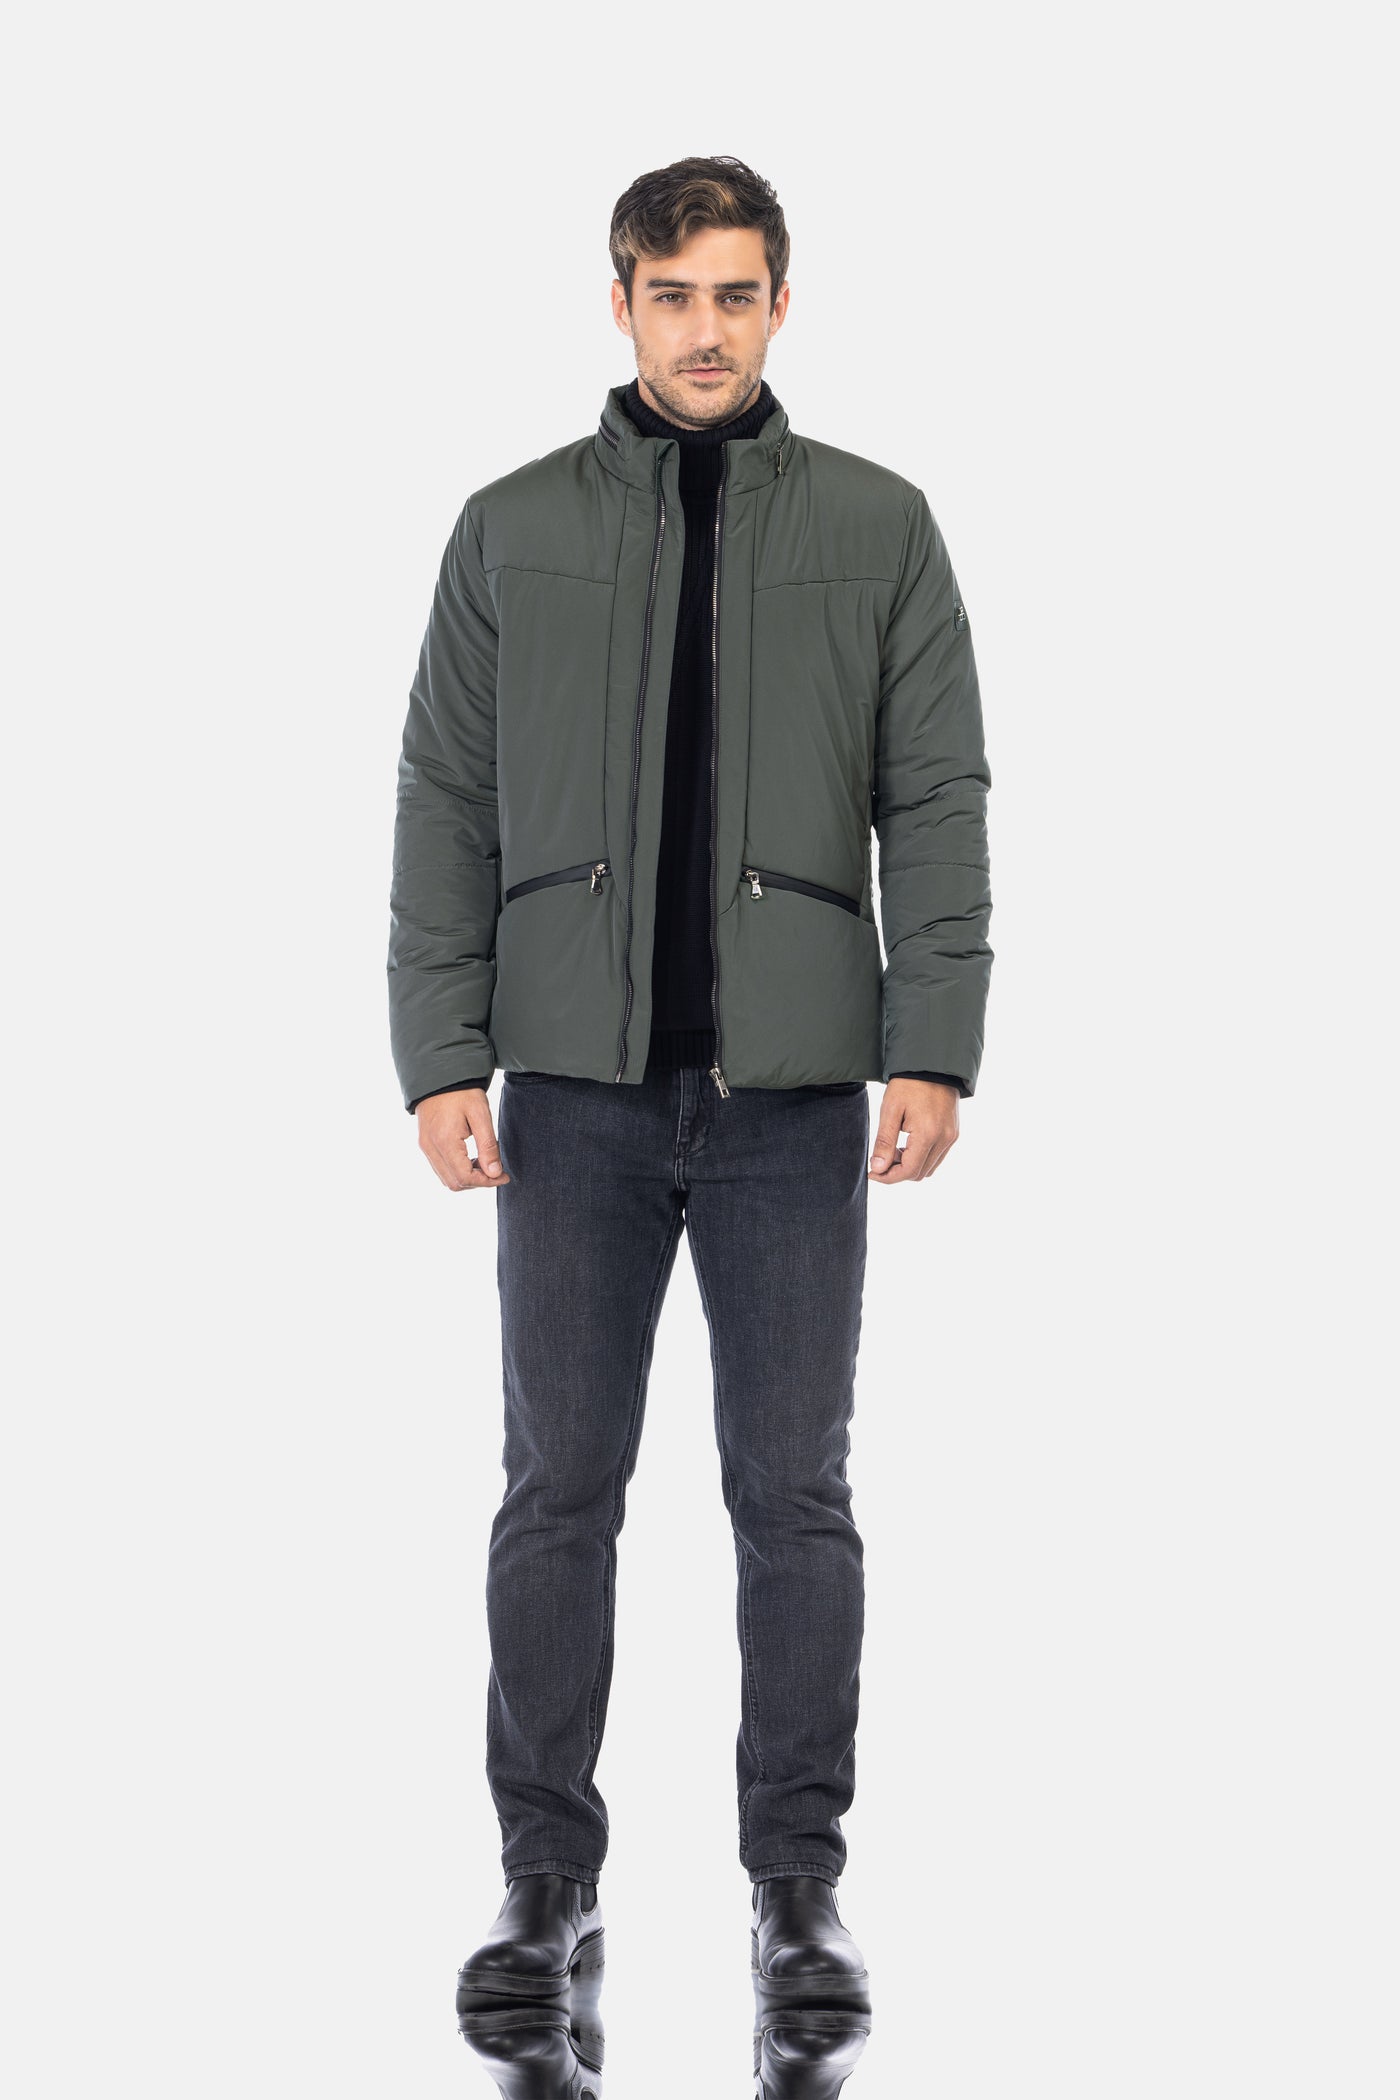 Waterproof Solid Patted Grayish Green Sweater Jacket